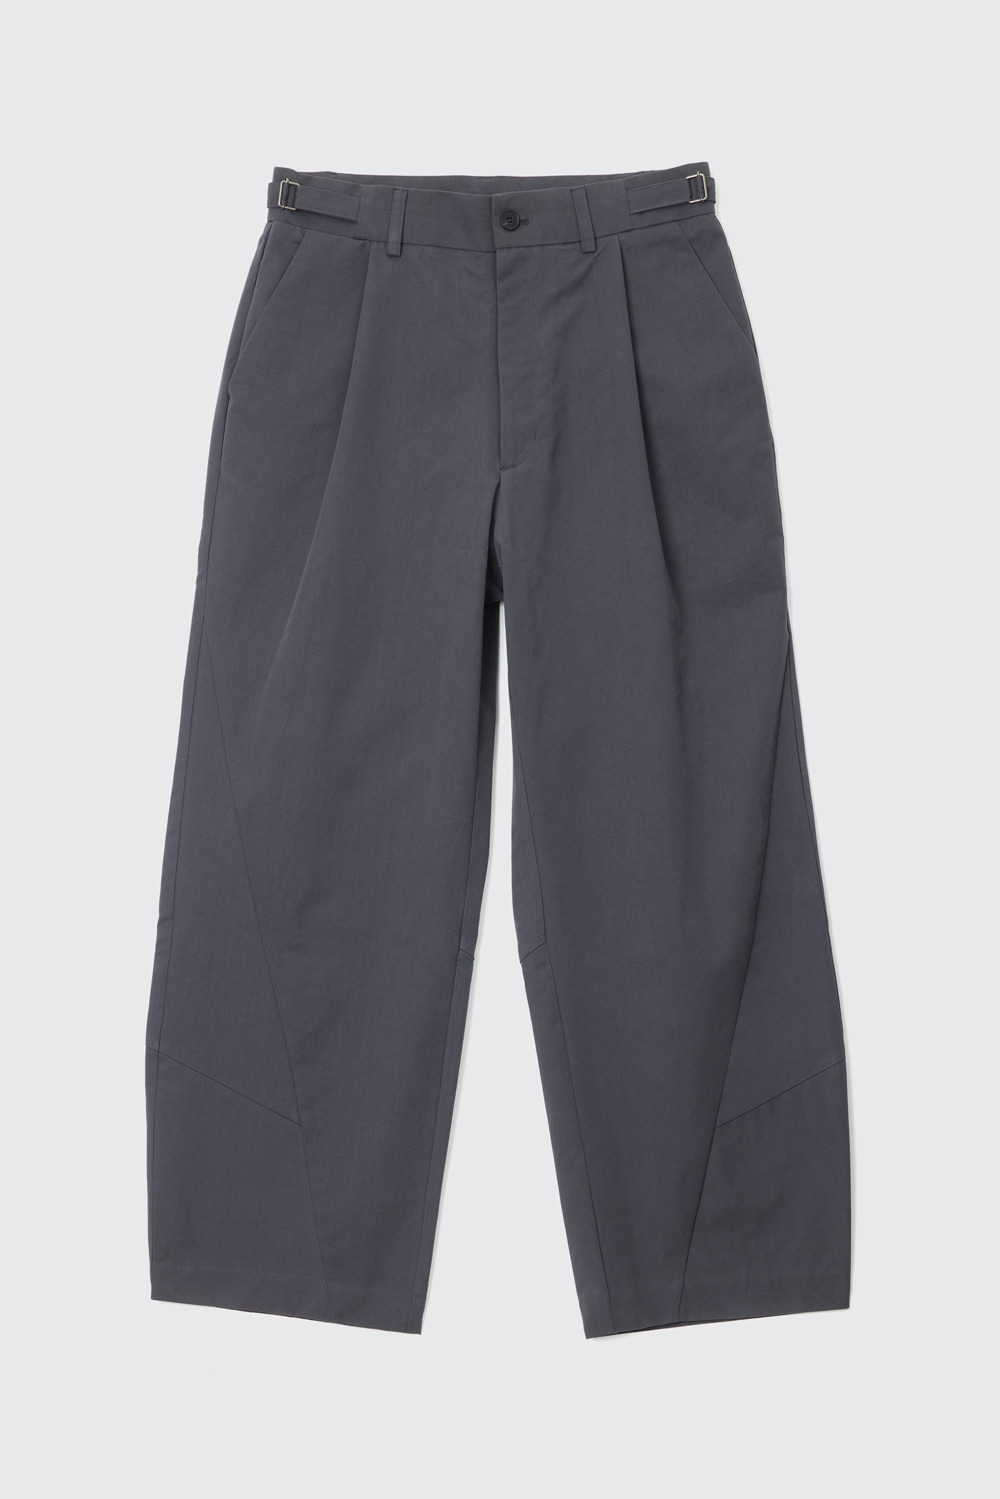 Triangle Trousers Charcoal (Restock)